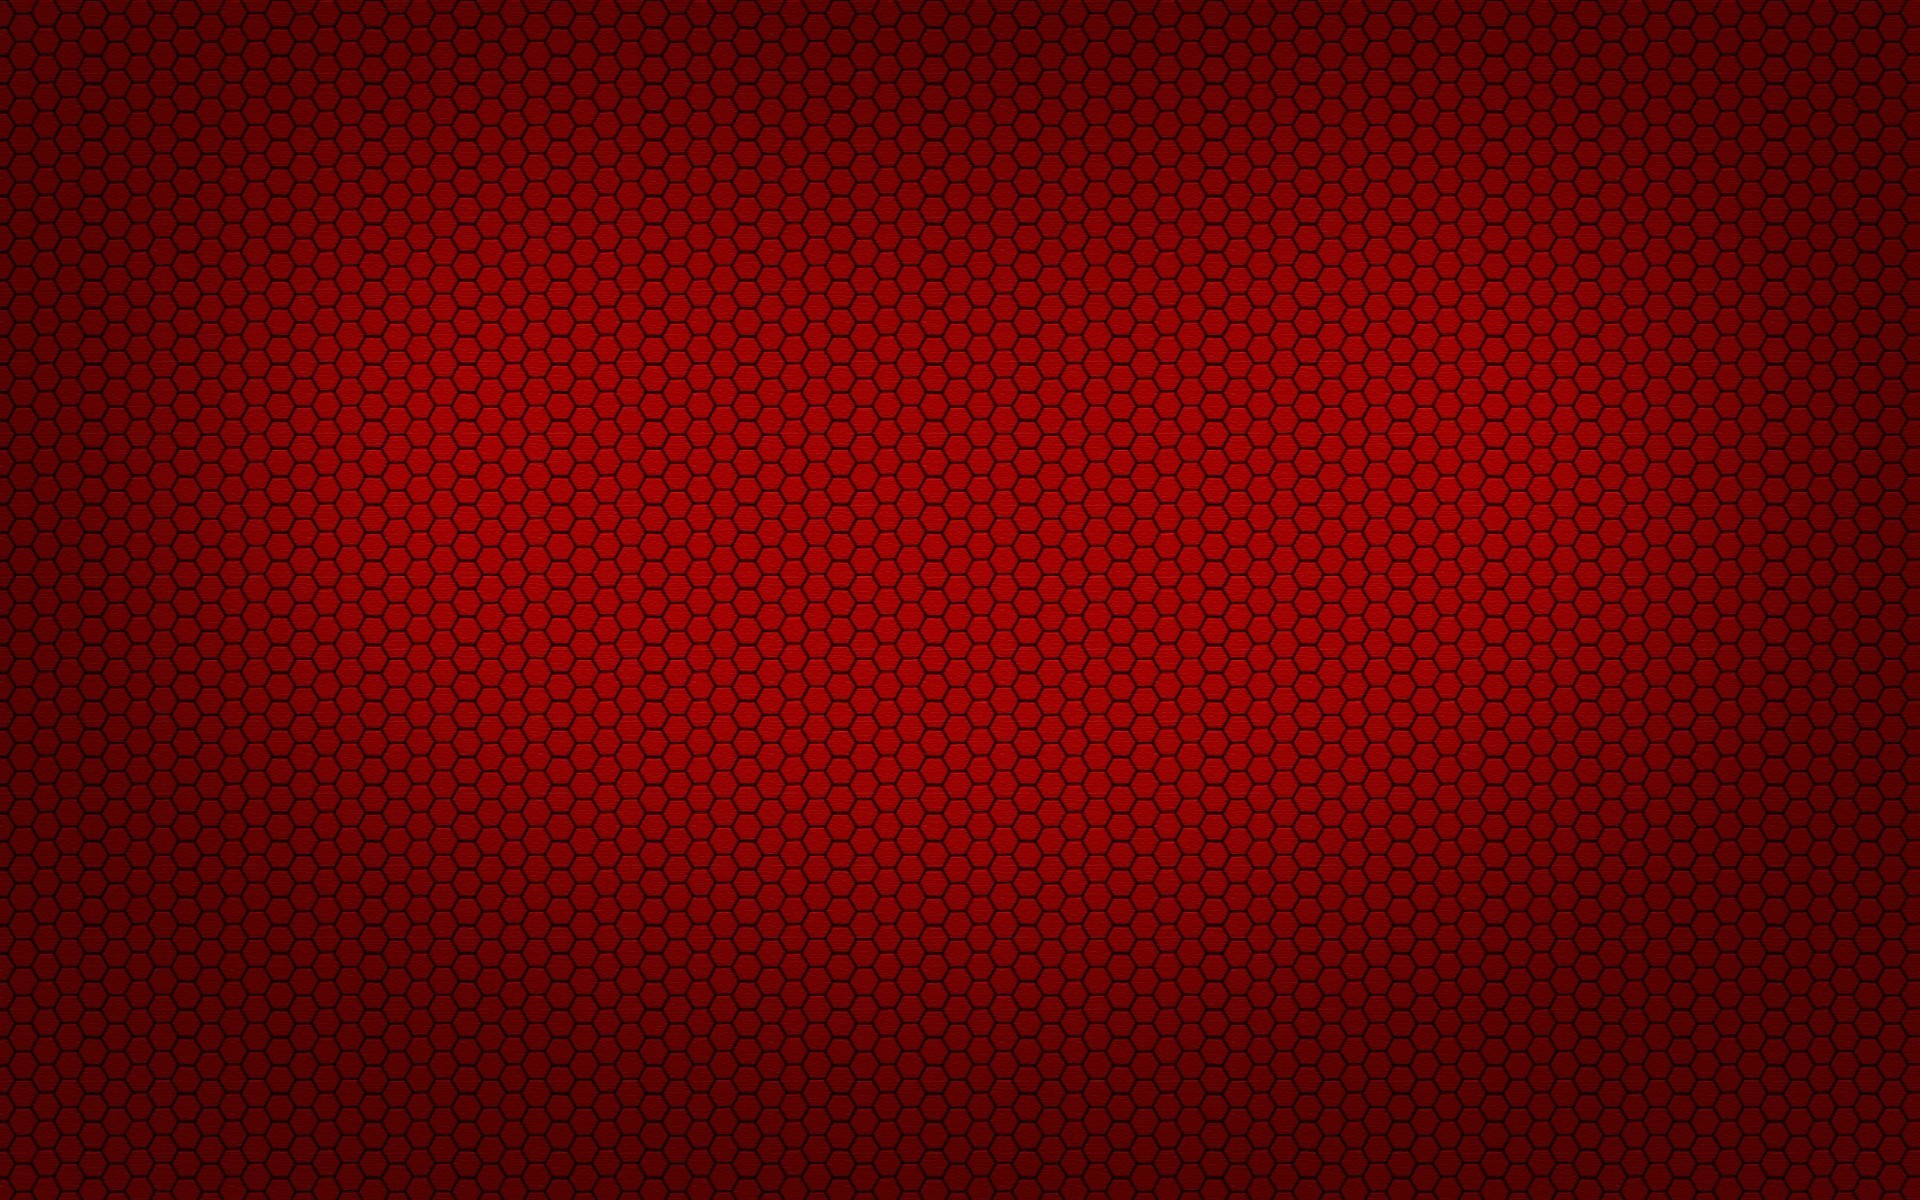 plain red backgrounds for photoshop